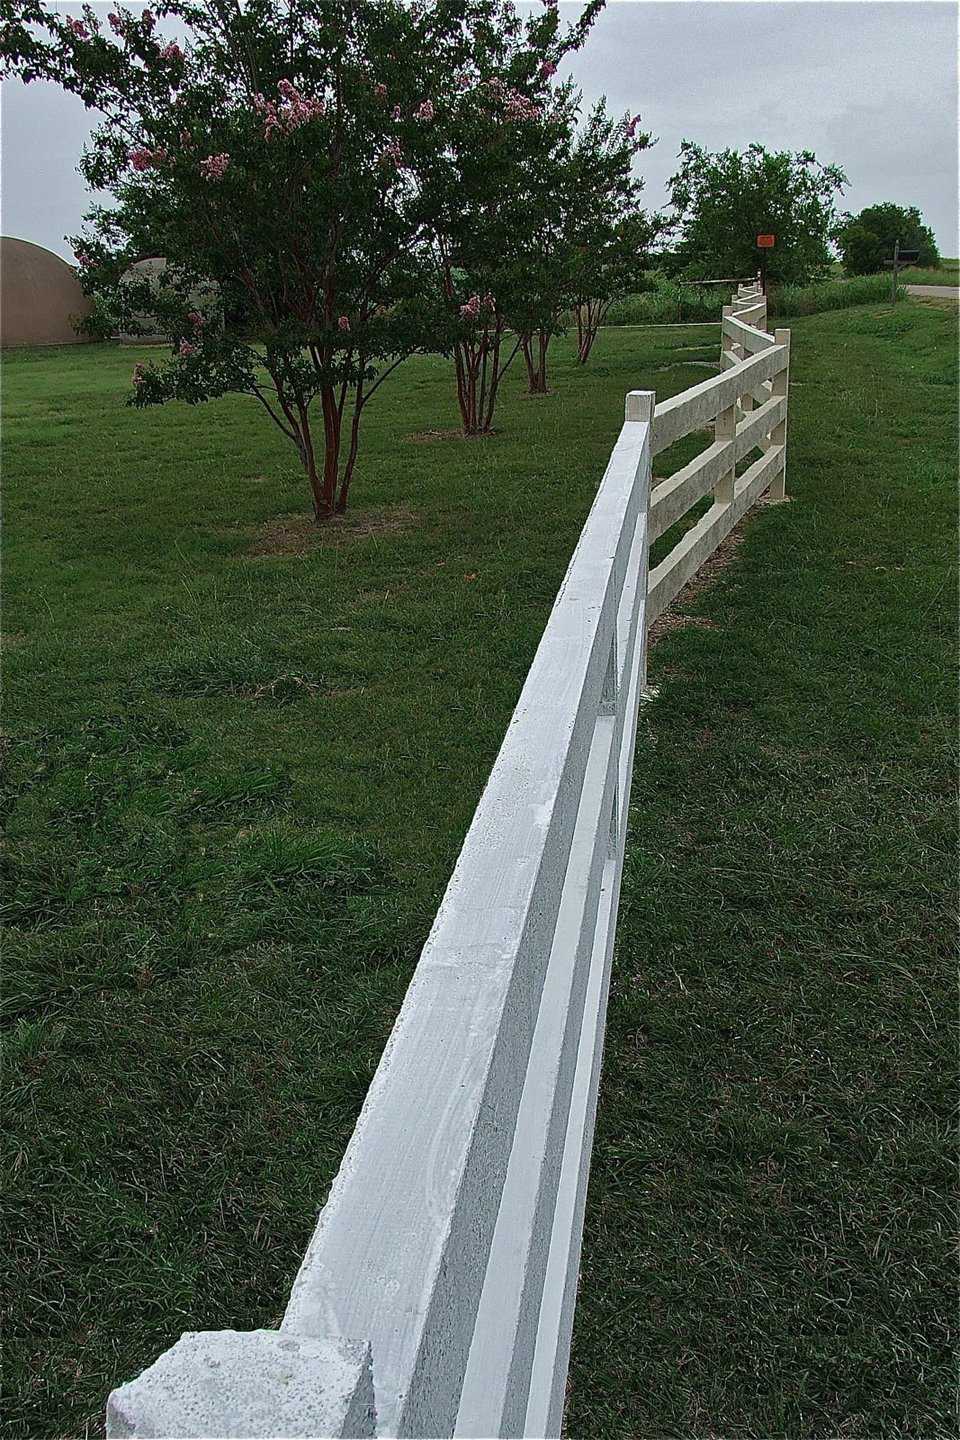 Here is an angle showing a straight fence section becoming zigzagged to ensure fence stability.